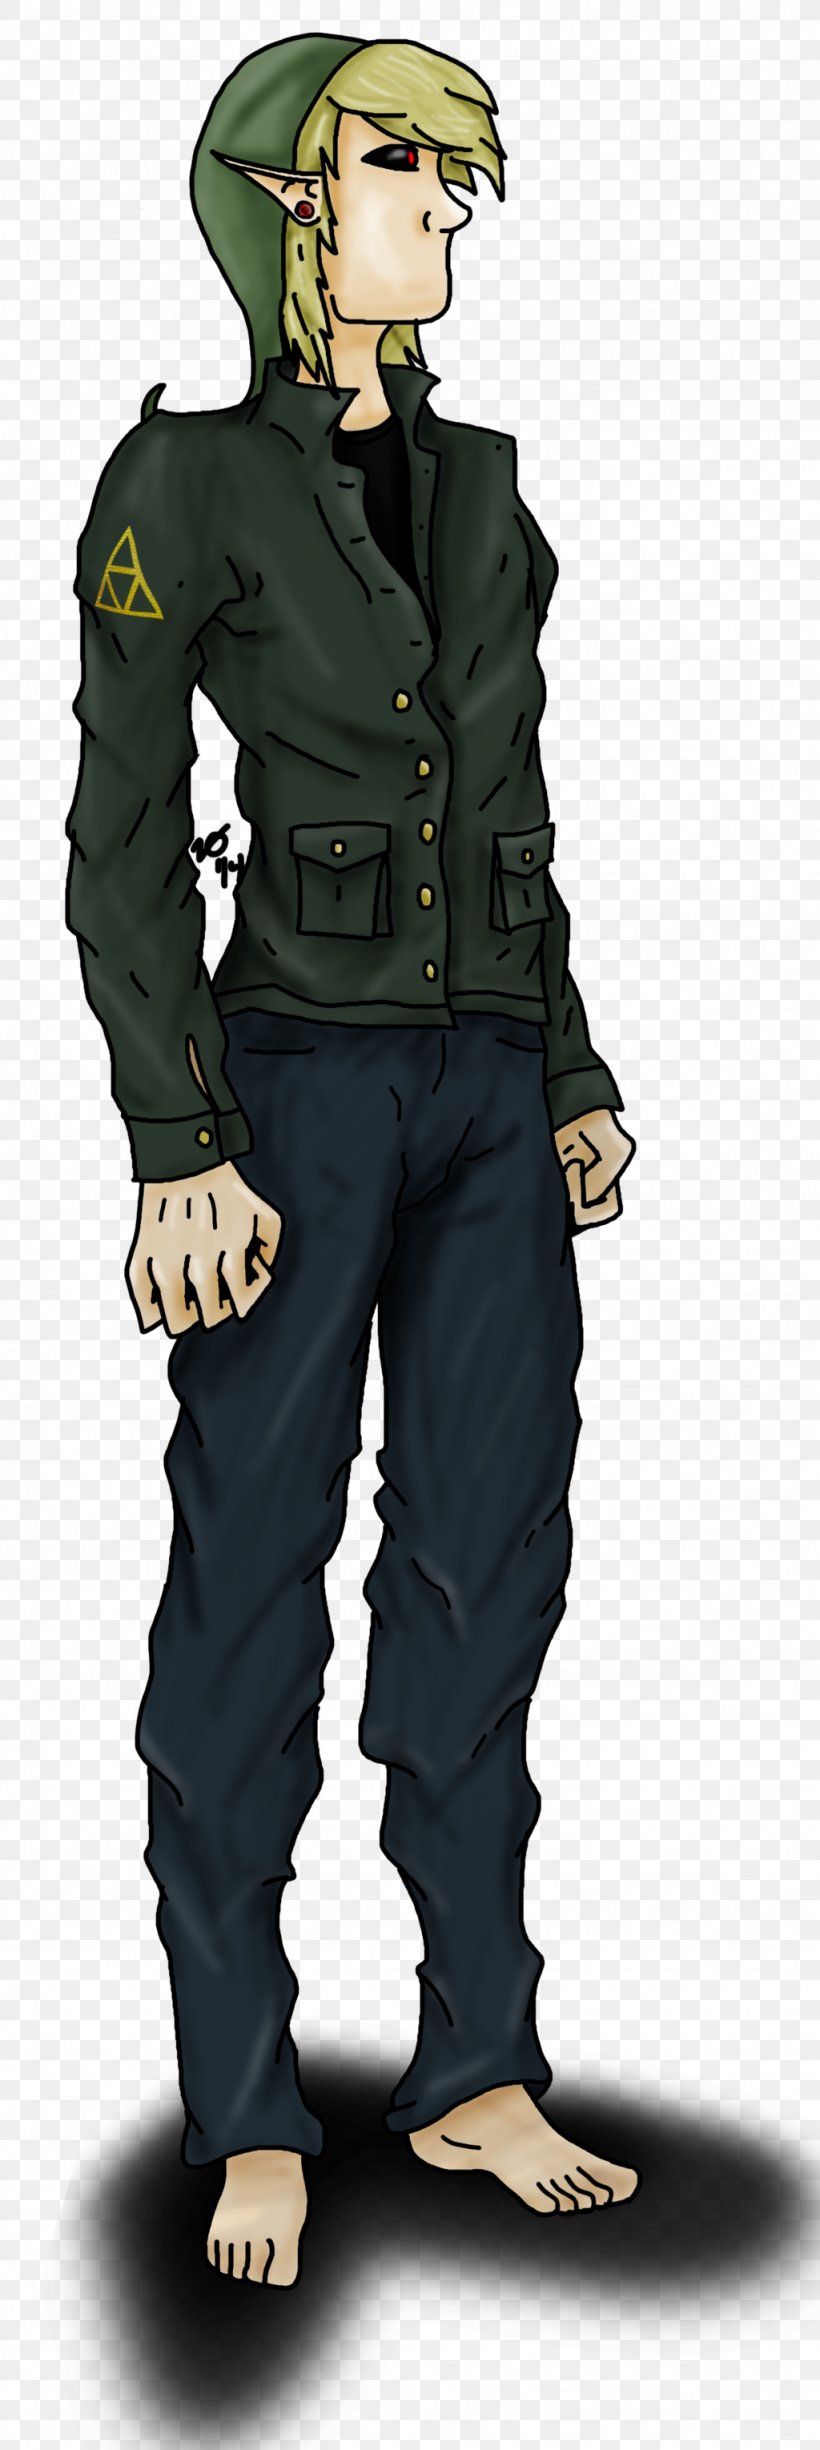 Soldier Military Uniform Creepypasta Cartoon, PNG, 1024x3060px, Soldier, Army Officer, Cartoon, Character, Comics Download Free